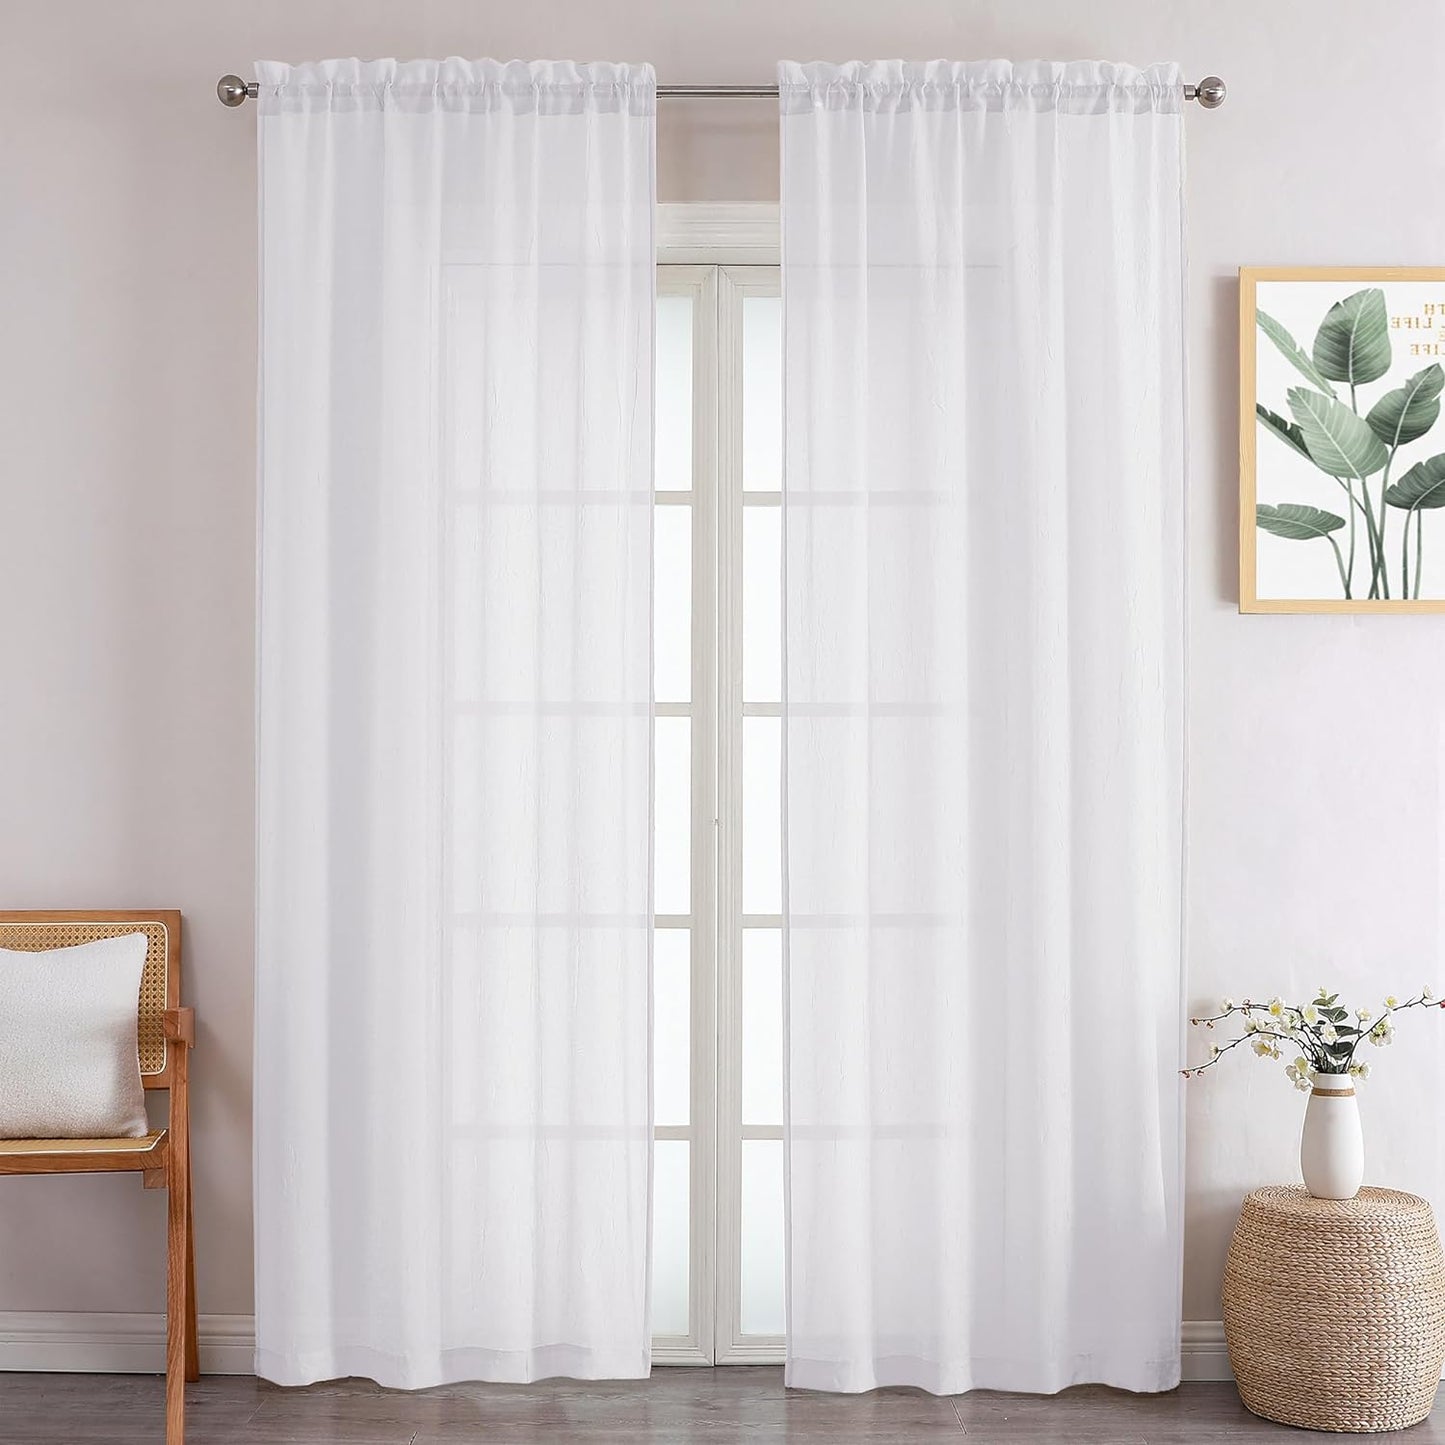 Chyhomenyc Crushed White Sheer Valances for Window 14 Inch Length 2 PCS, Crinkle Voile Short Kitchen Curtains with Dual Rod Pockets，Gauzy Bedroom Curtain Valance，Each 42Wx14L Inches  Chyhomenyc White 42 W X 96 L 